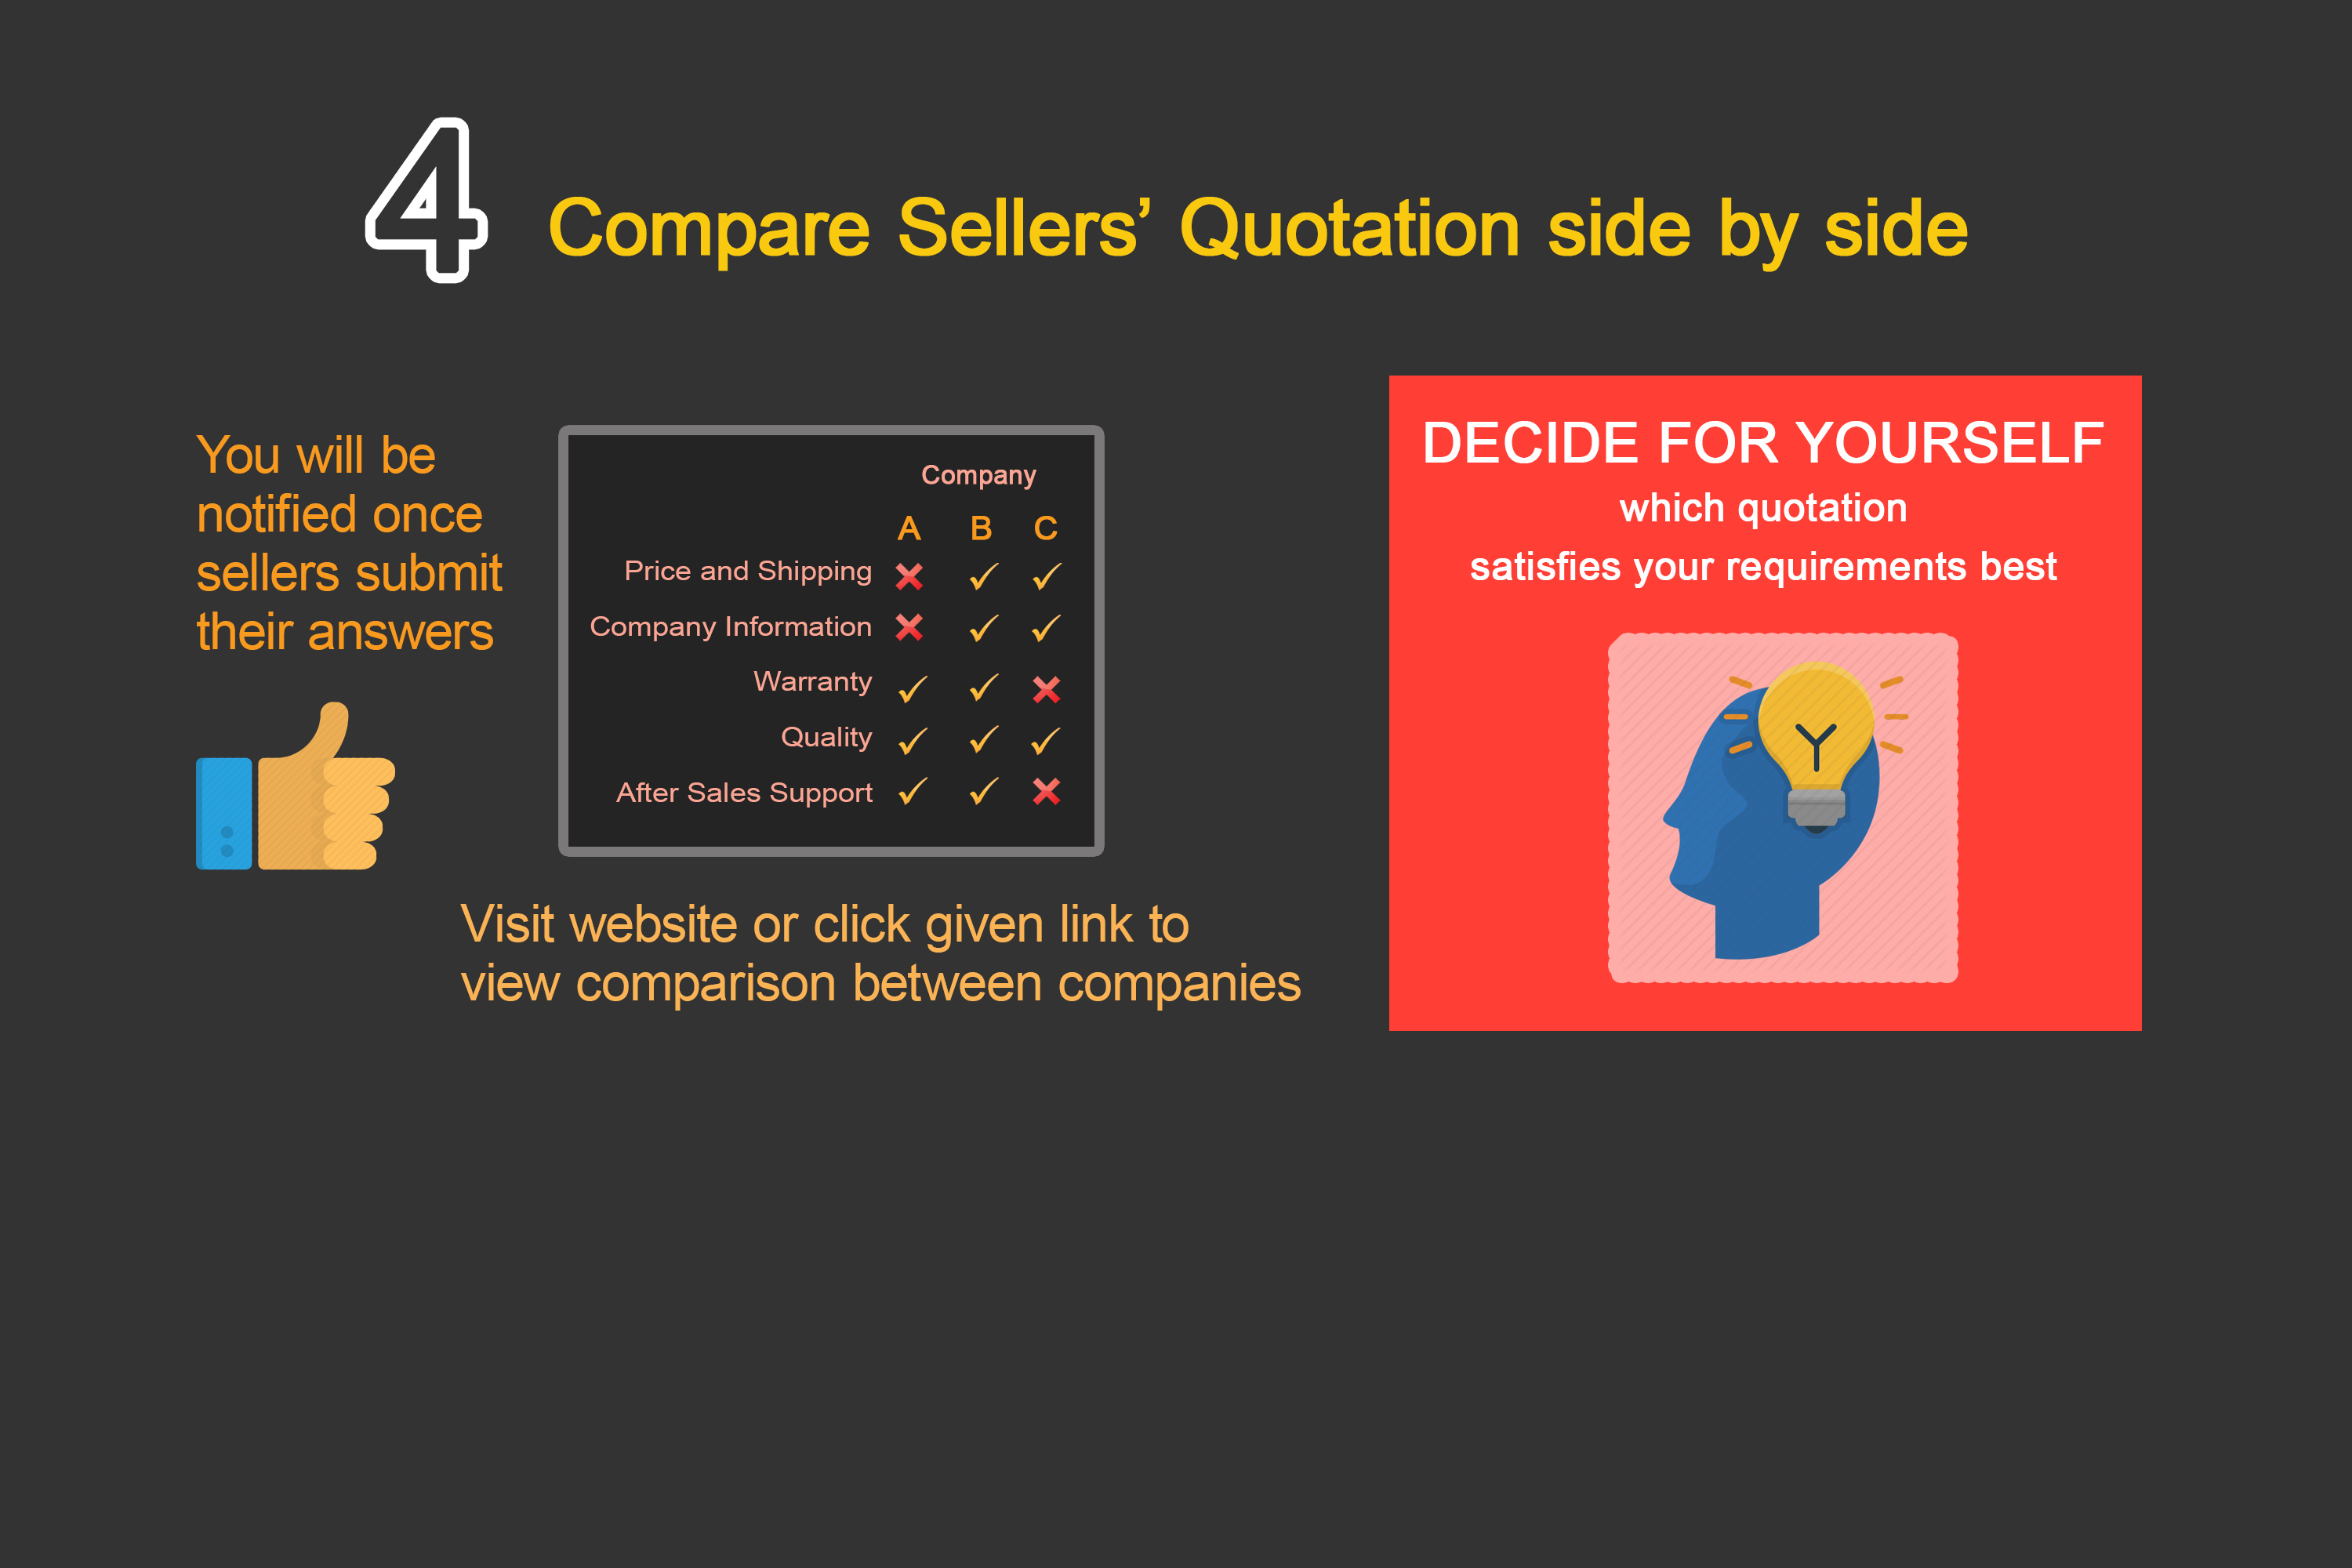 When all sellers have finished submitting their answers, you will be able to compare all the Clicker Press information side by side.